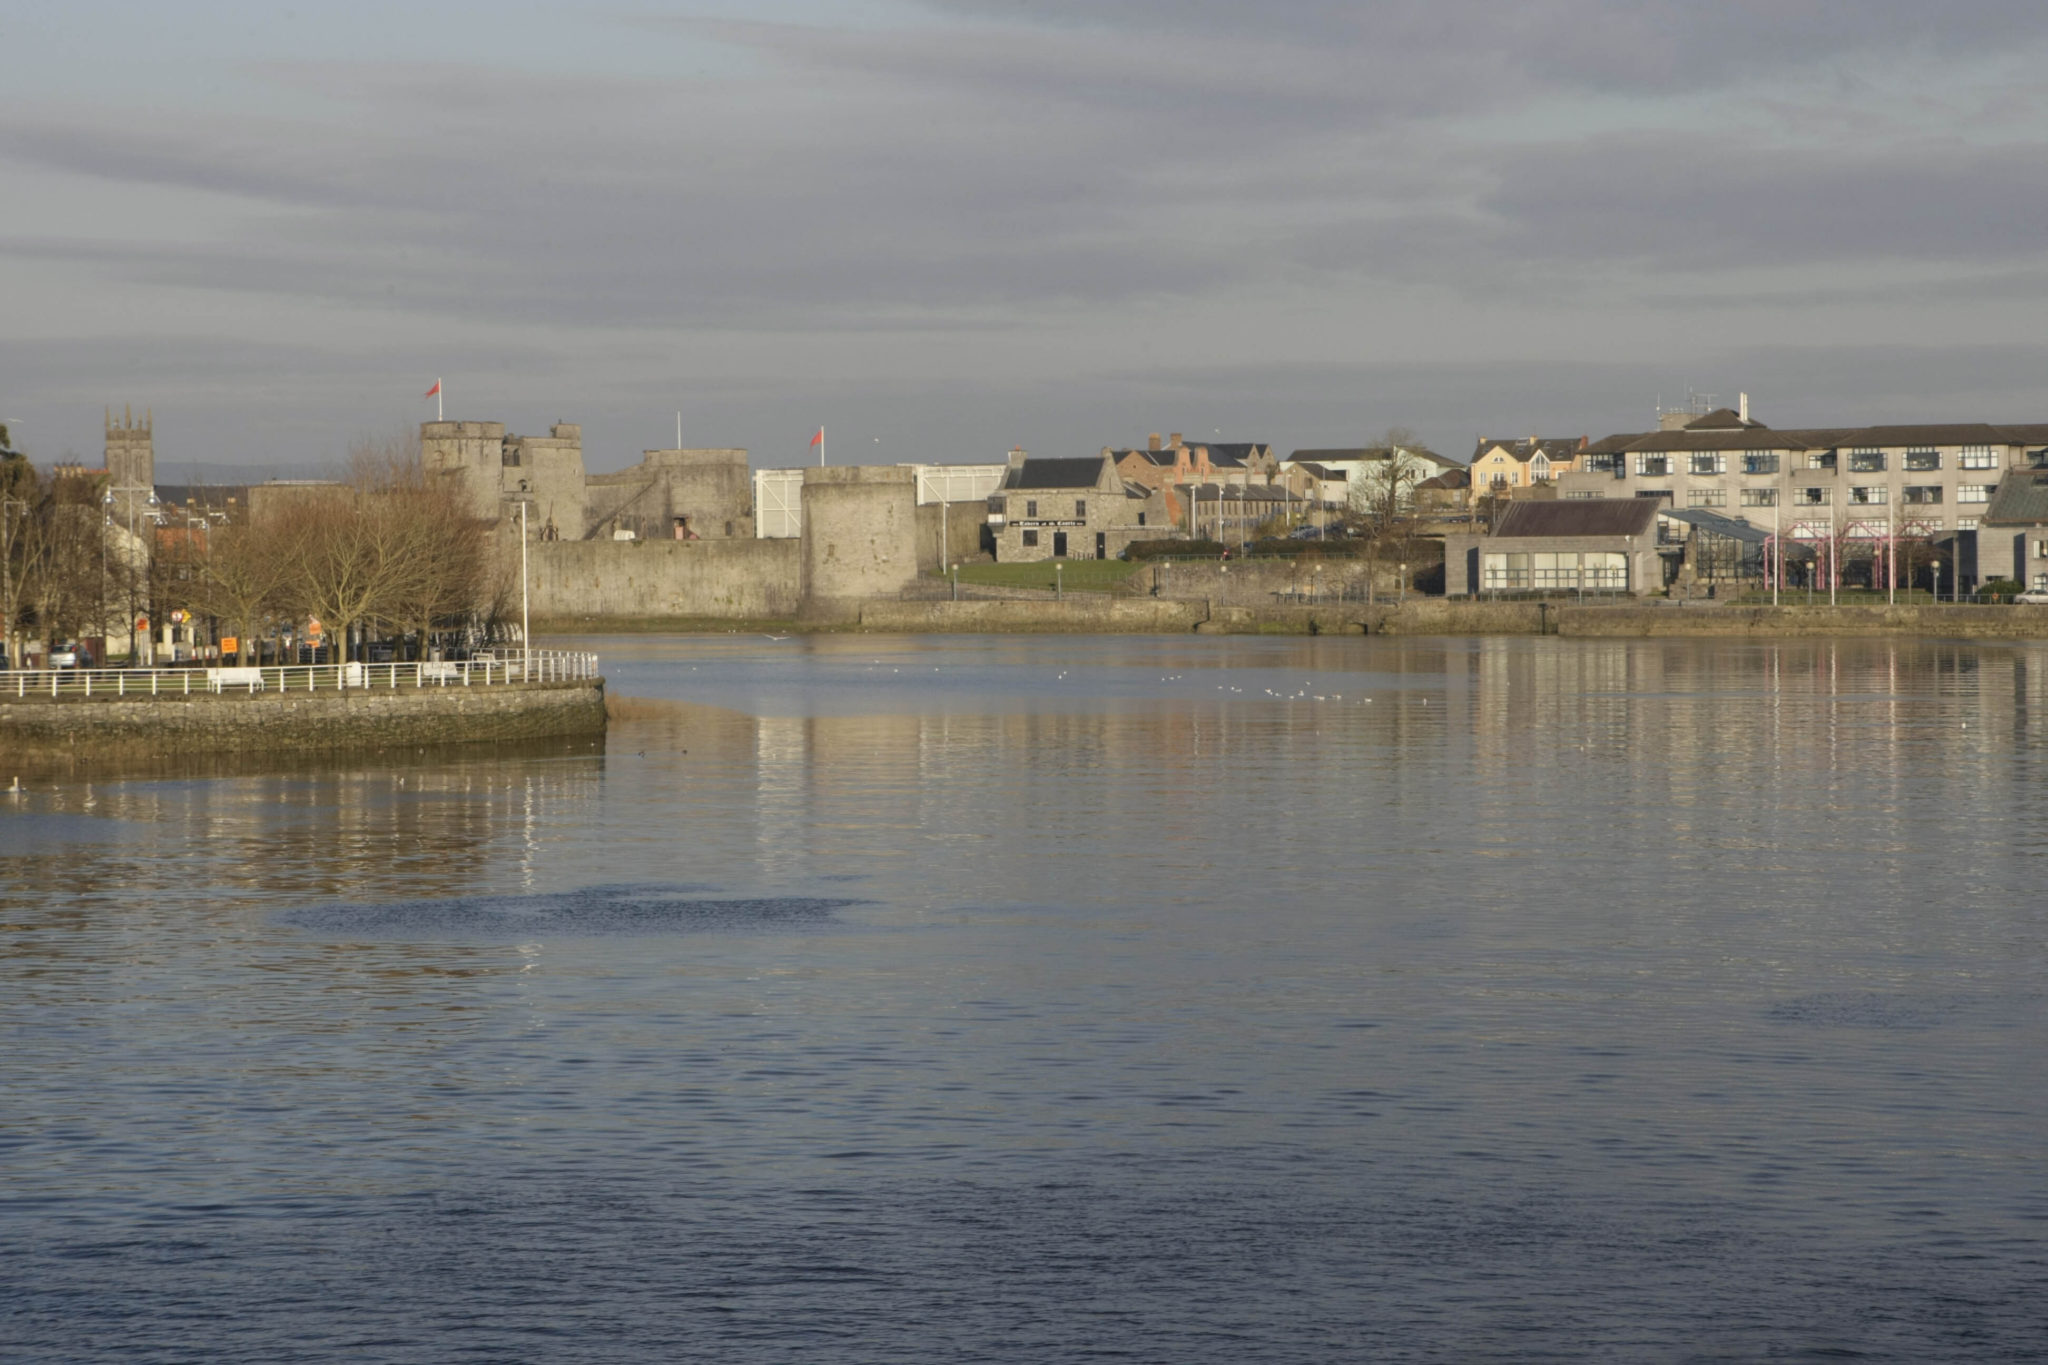 The river Shannon as it passes through Limerick city